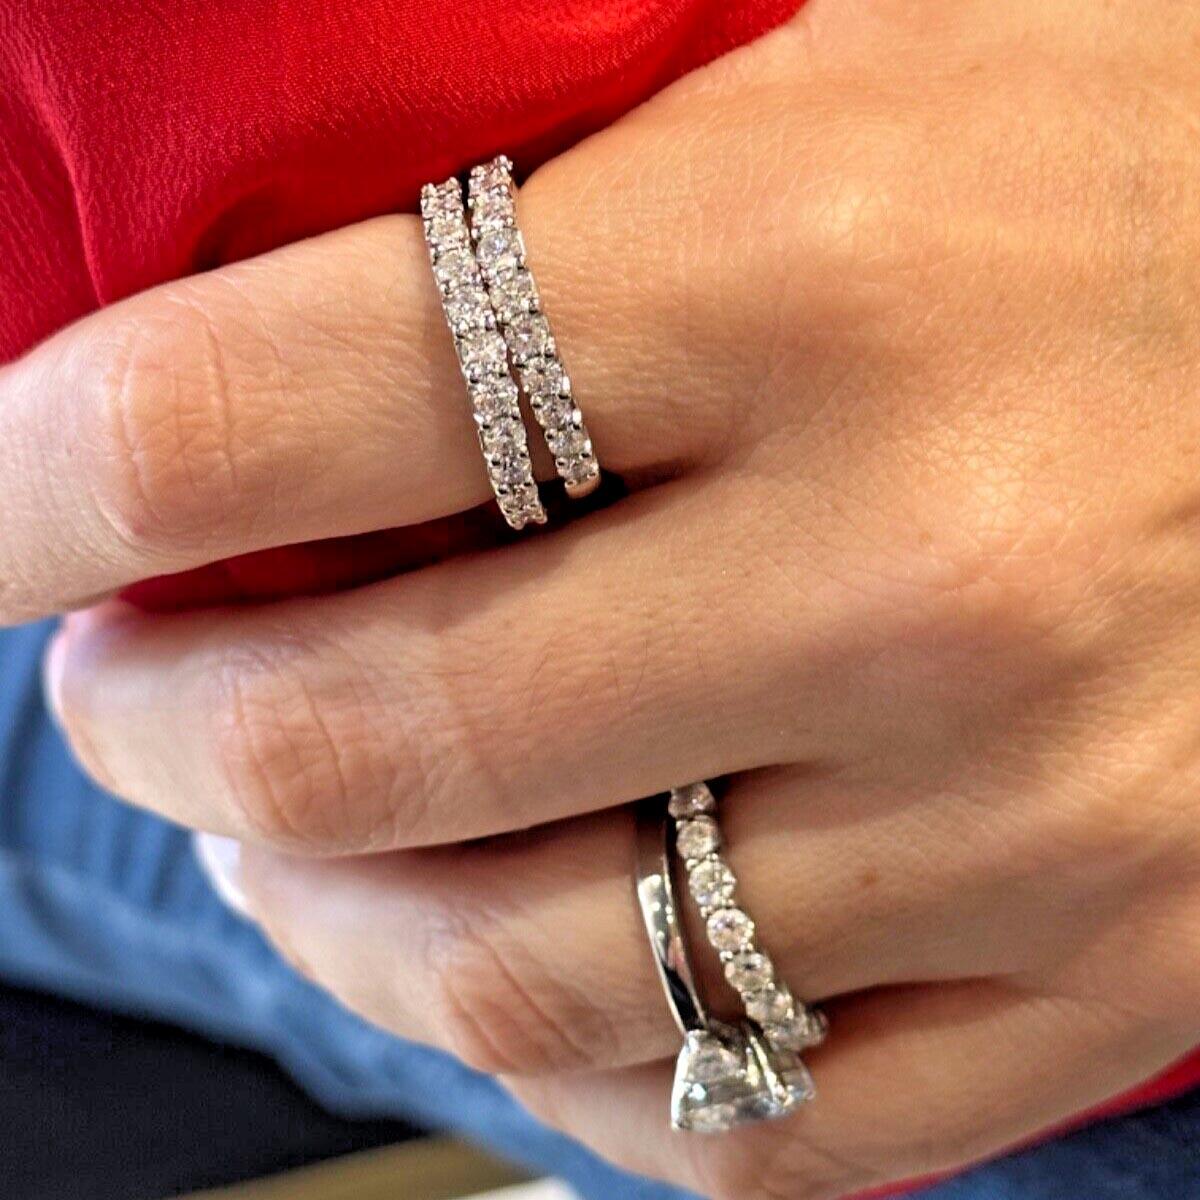 Style​​​​​​​ : Half Eternity Band

Metal: White Gold

Metal Purity: 14K

Stone: Diamonds

Stone count: 24 Total

Total Carat Weight: 1.3CT Each 2.6CT Total

Stone colorG-H / VVS1

Ring Size: 8.75 (Sizable)

Weight : 6.3g total

Includes:   24 Month